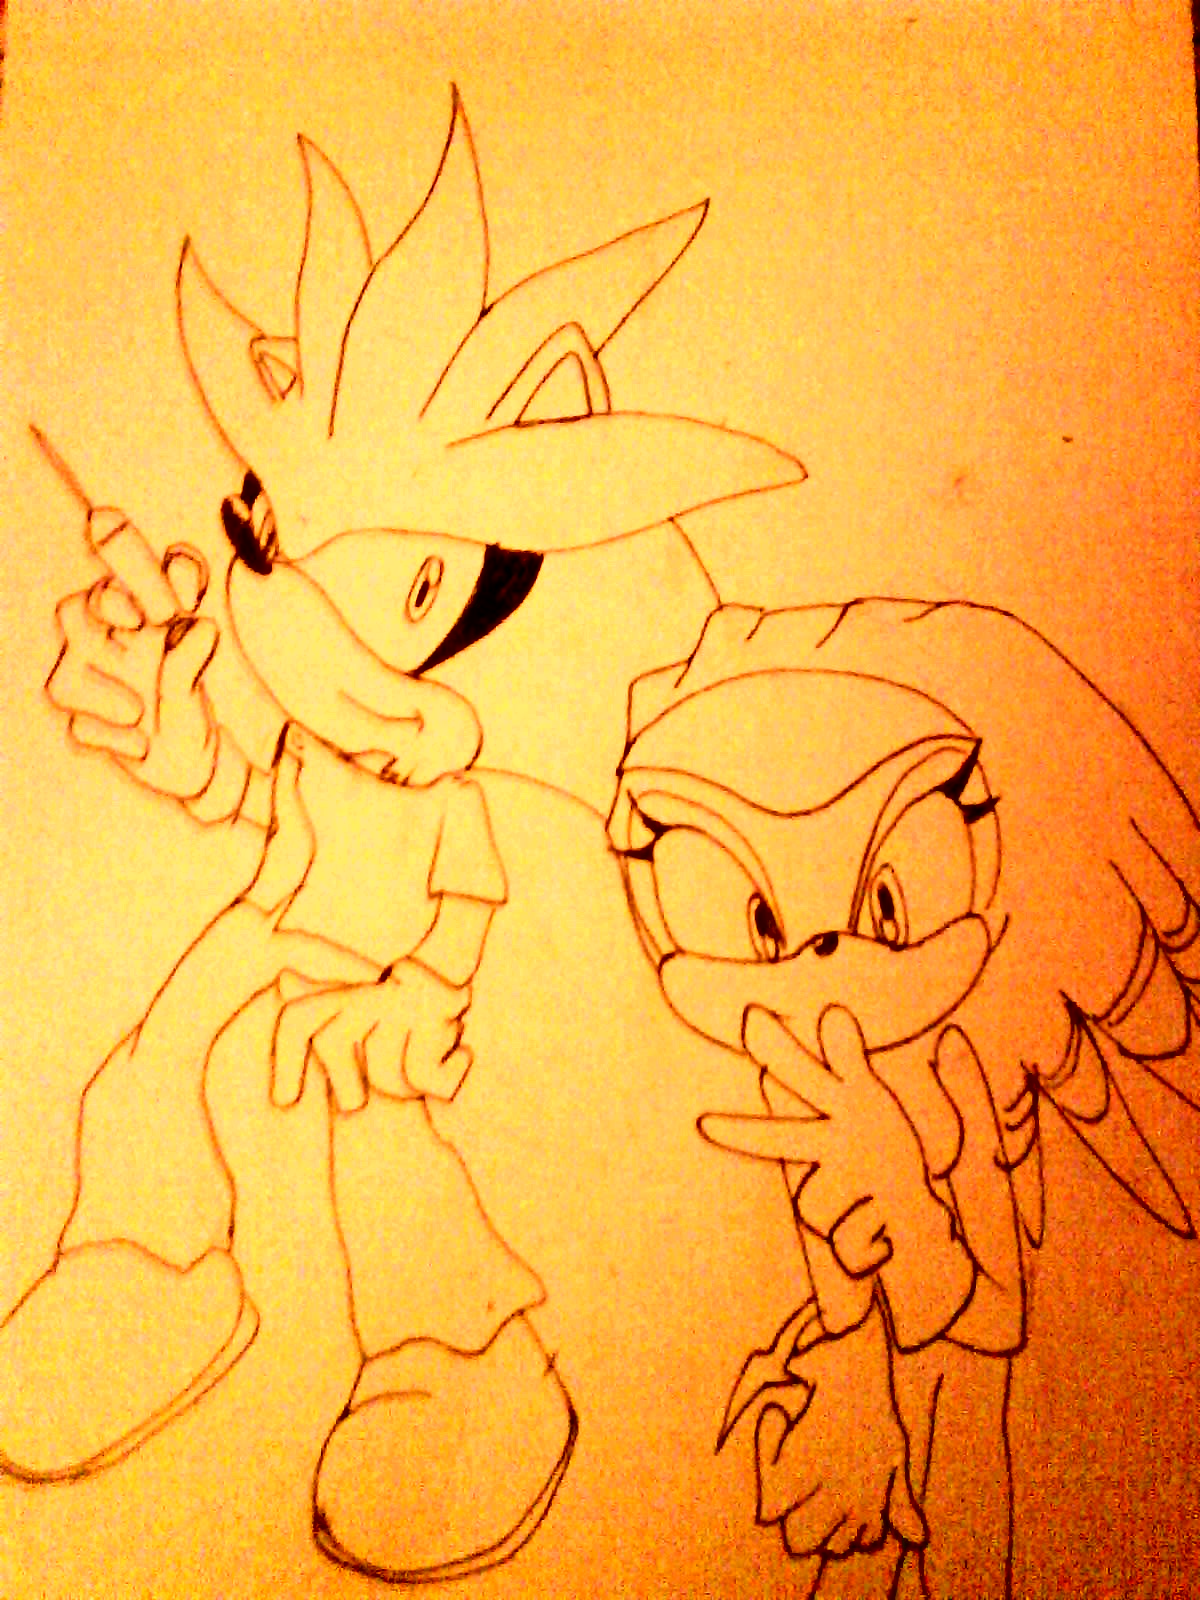 RQ MasterAccount Silver the Hedgehog and Shade the Echidna by AlexFox11